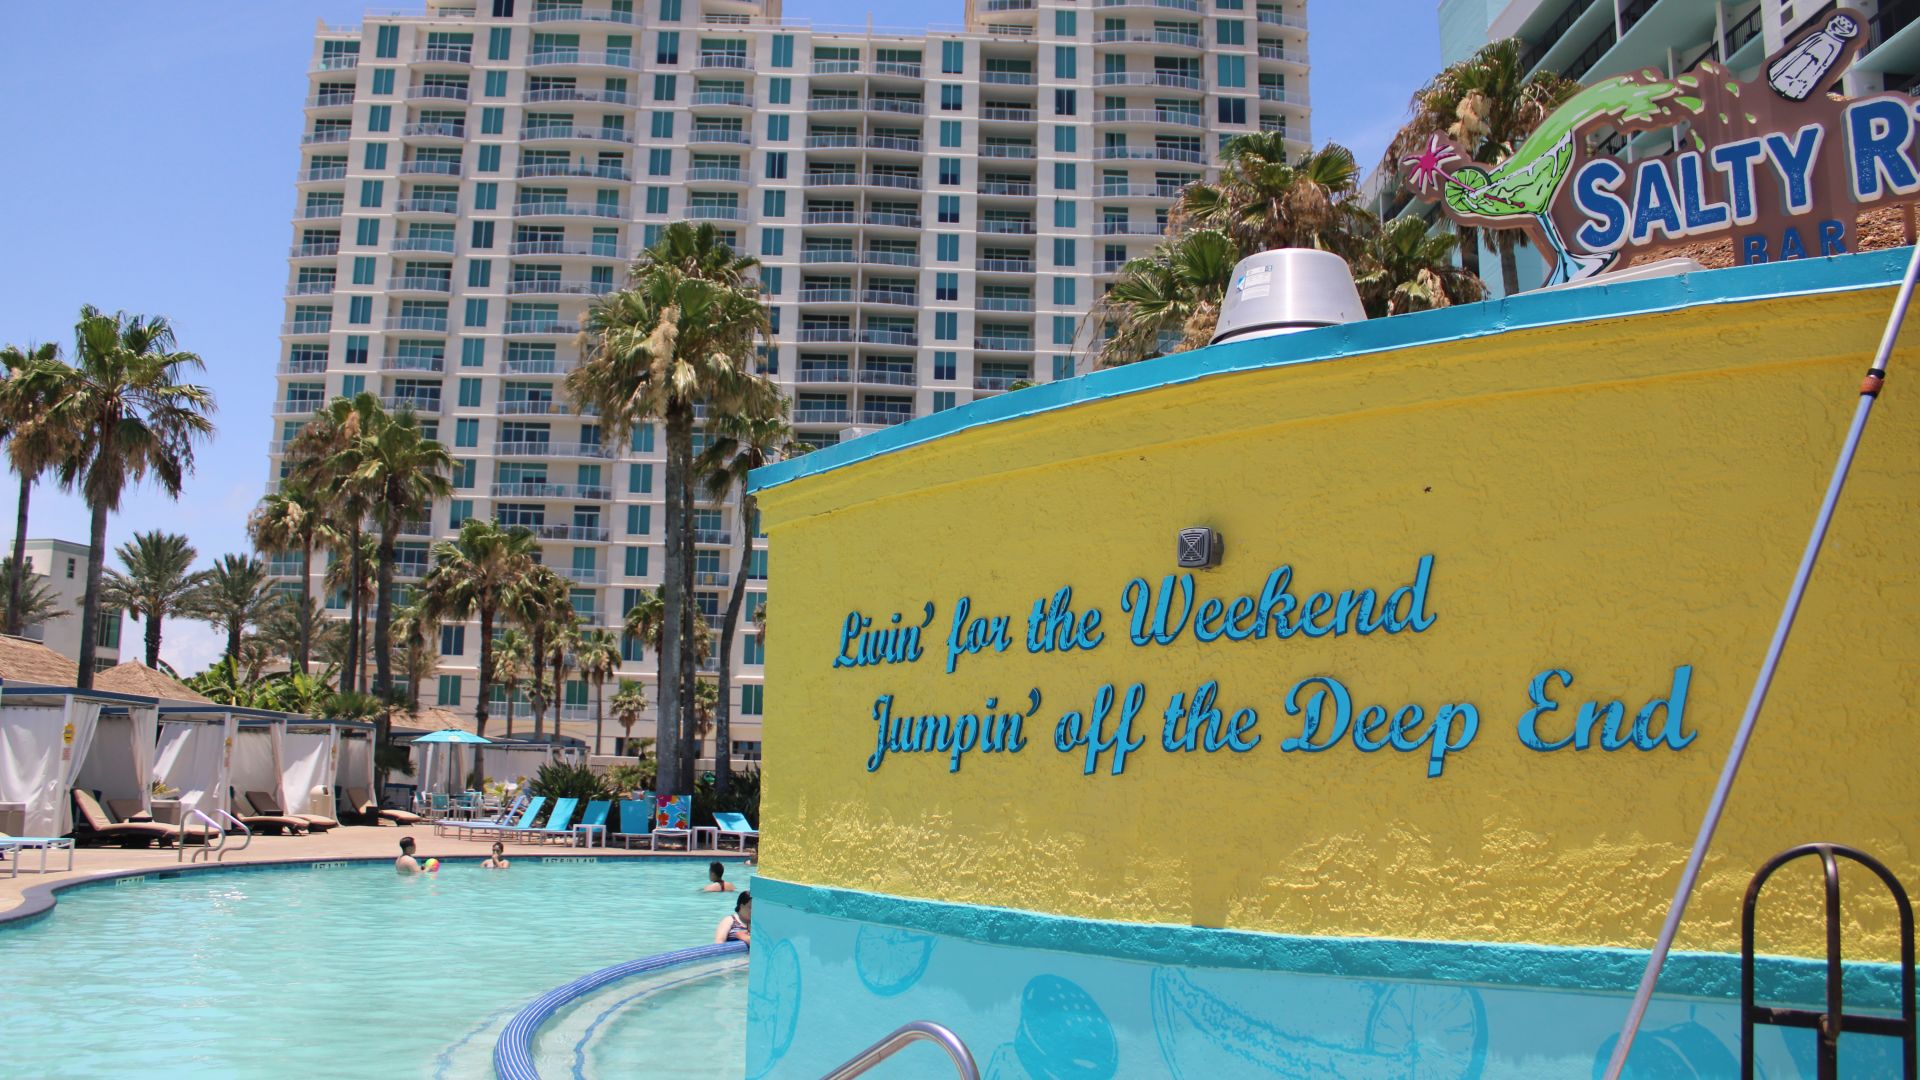 A Large Yellow Sign Next To A Pool With People In It